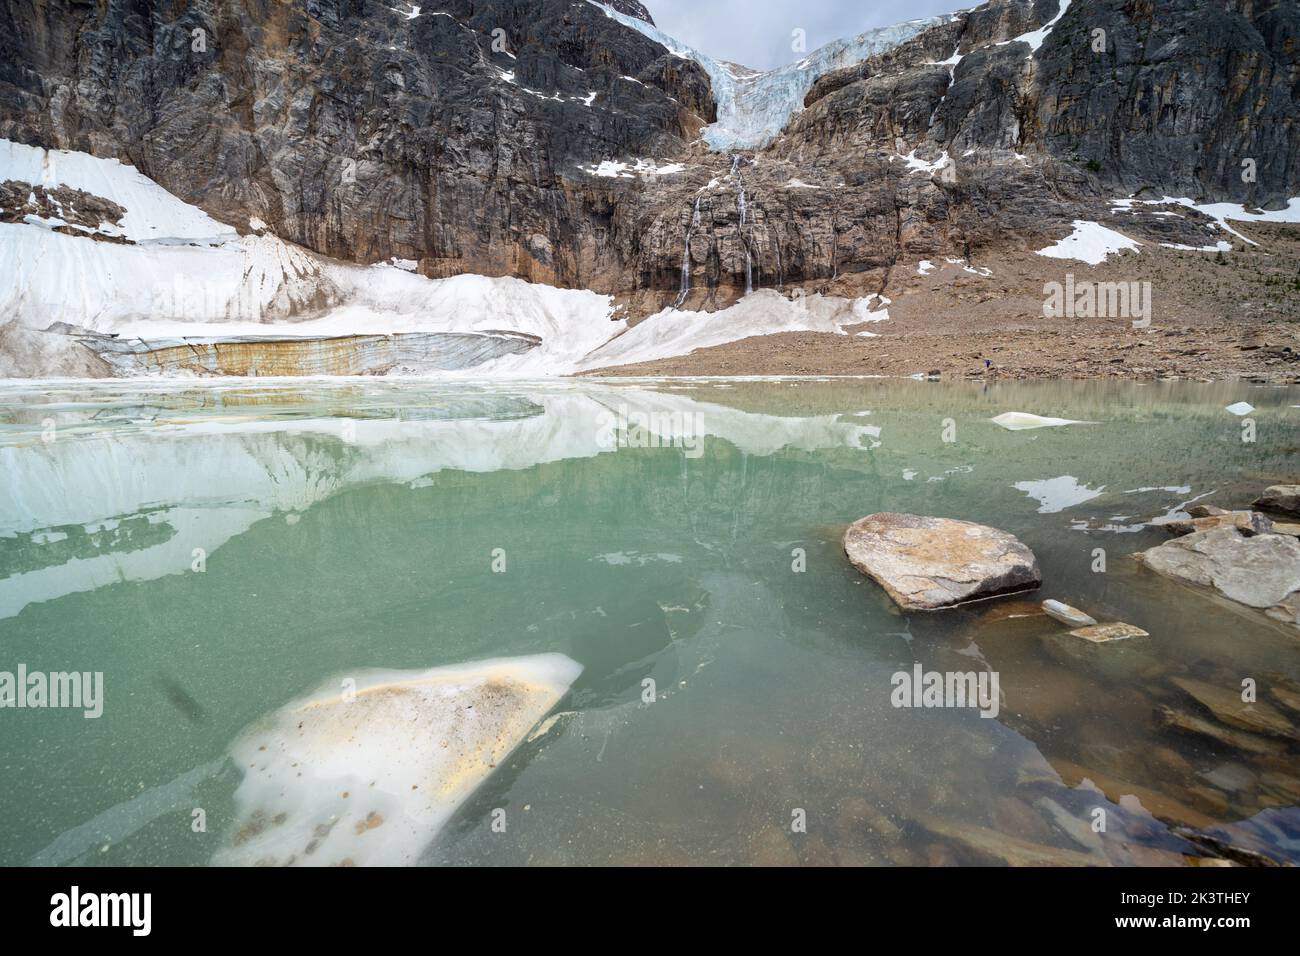 Glacial remnants and icebergs in an alpine lake at the Path of the Glacier Trail in Mount Edith Cavell in Jasper National Park in Canada Stock Photo